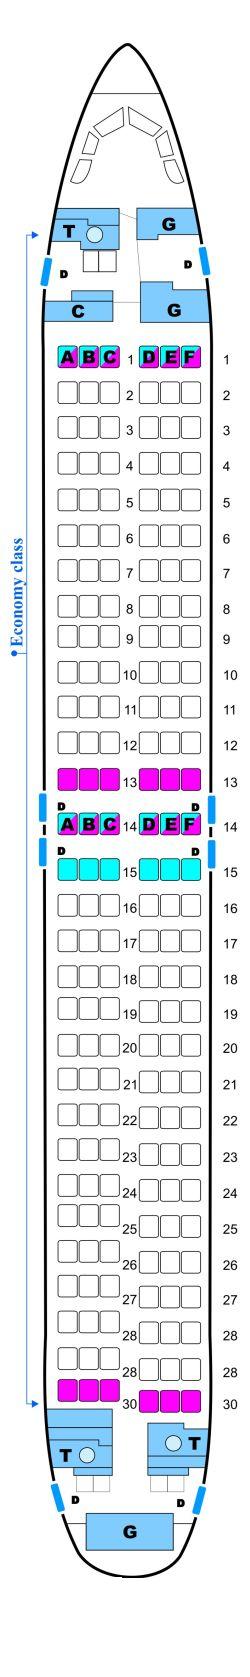 Seat map for Malev Hungarian Airlines Boeing B737 800NG Config. 2